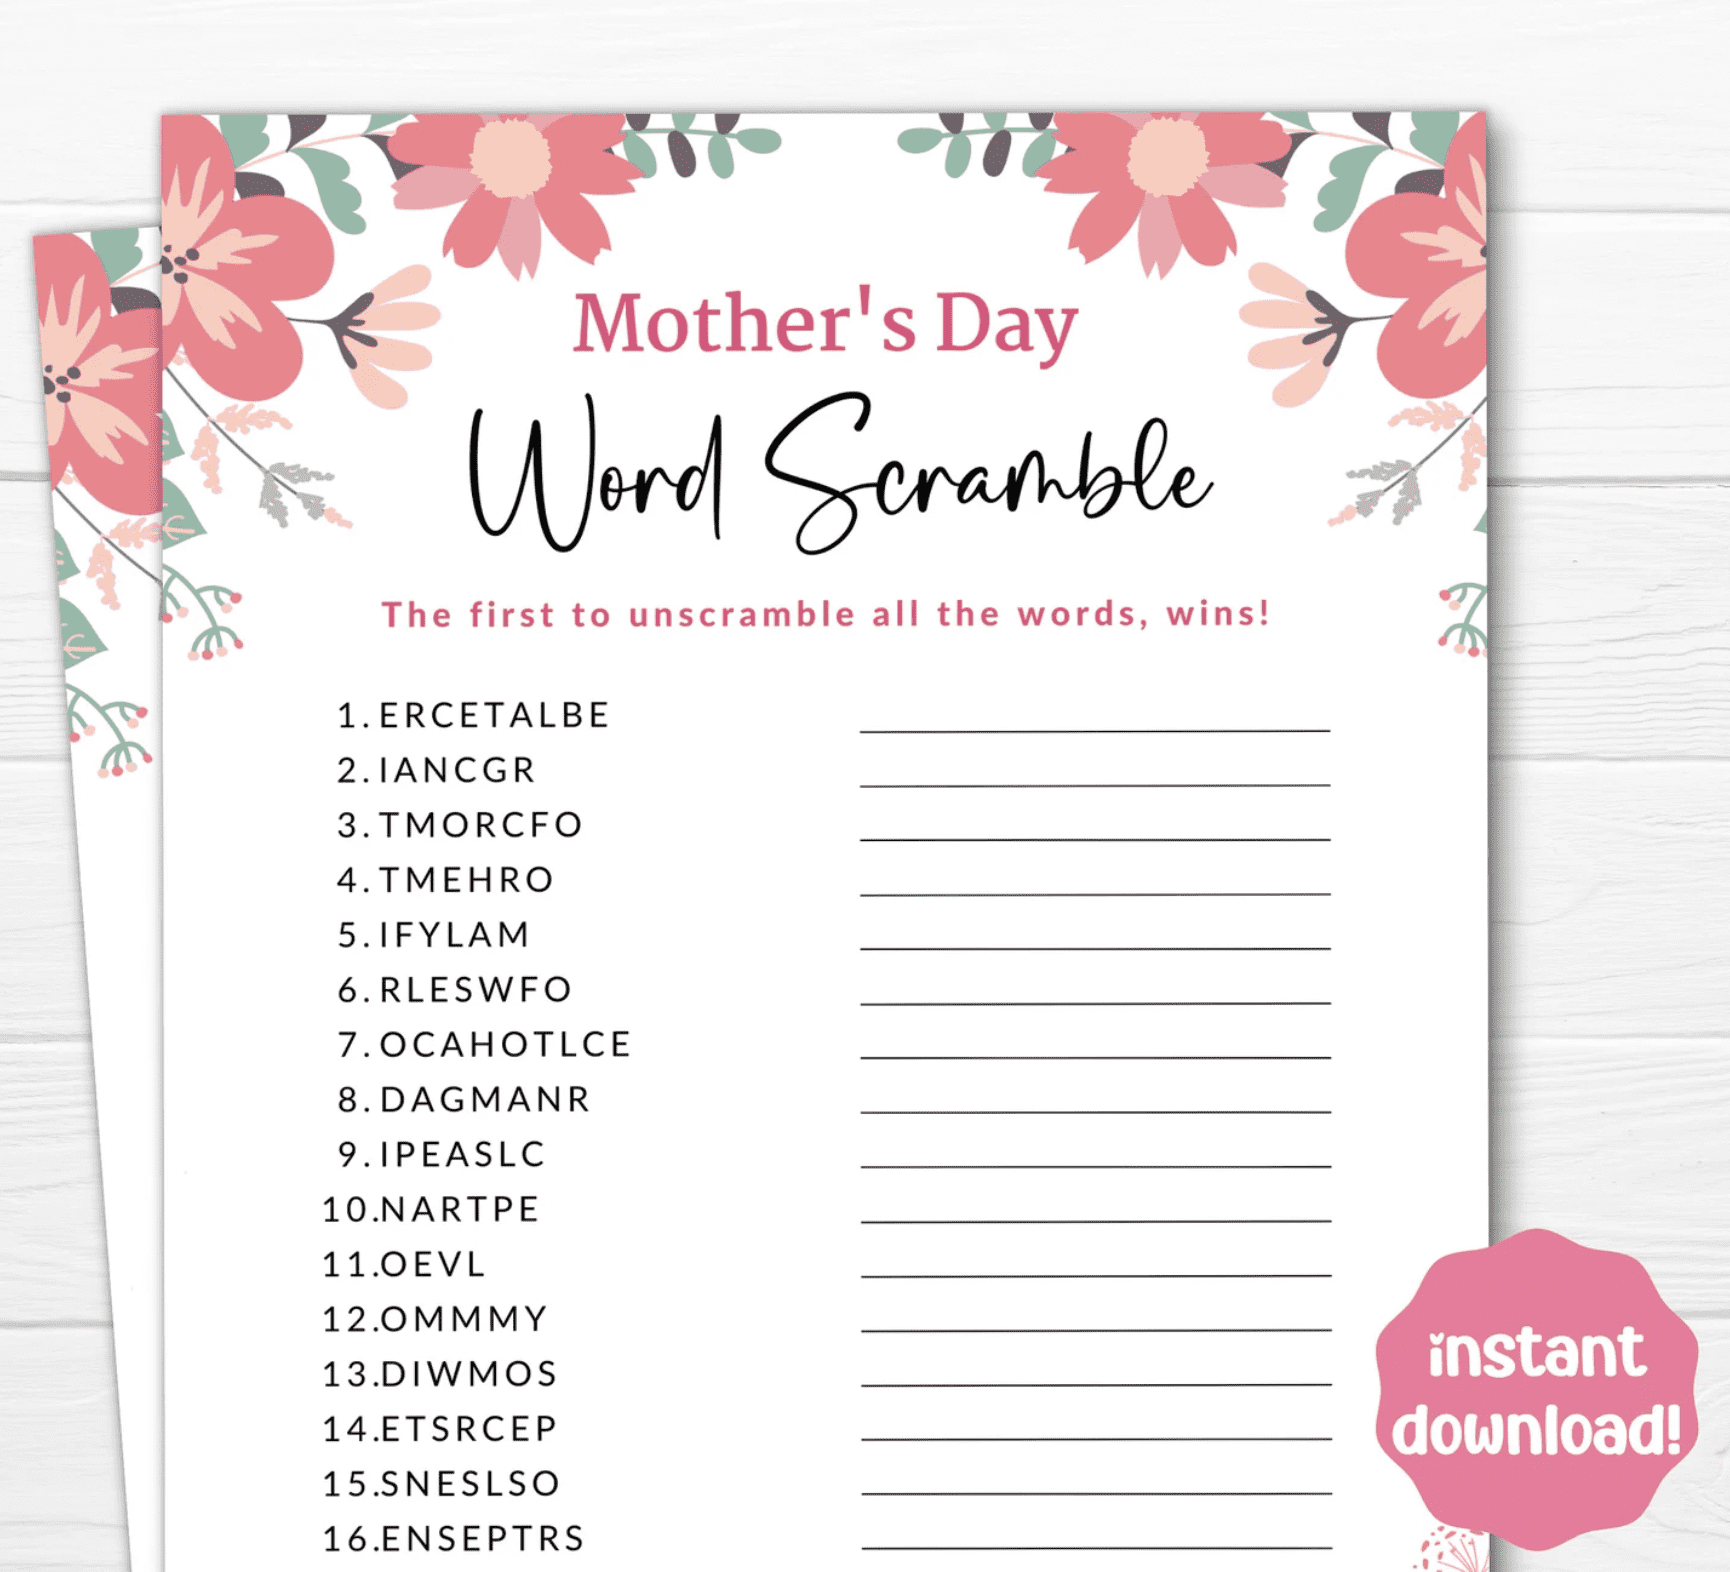 Mother’s Day Word Scramble